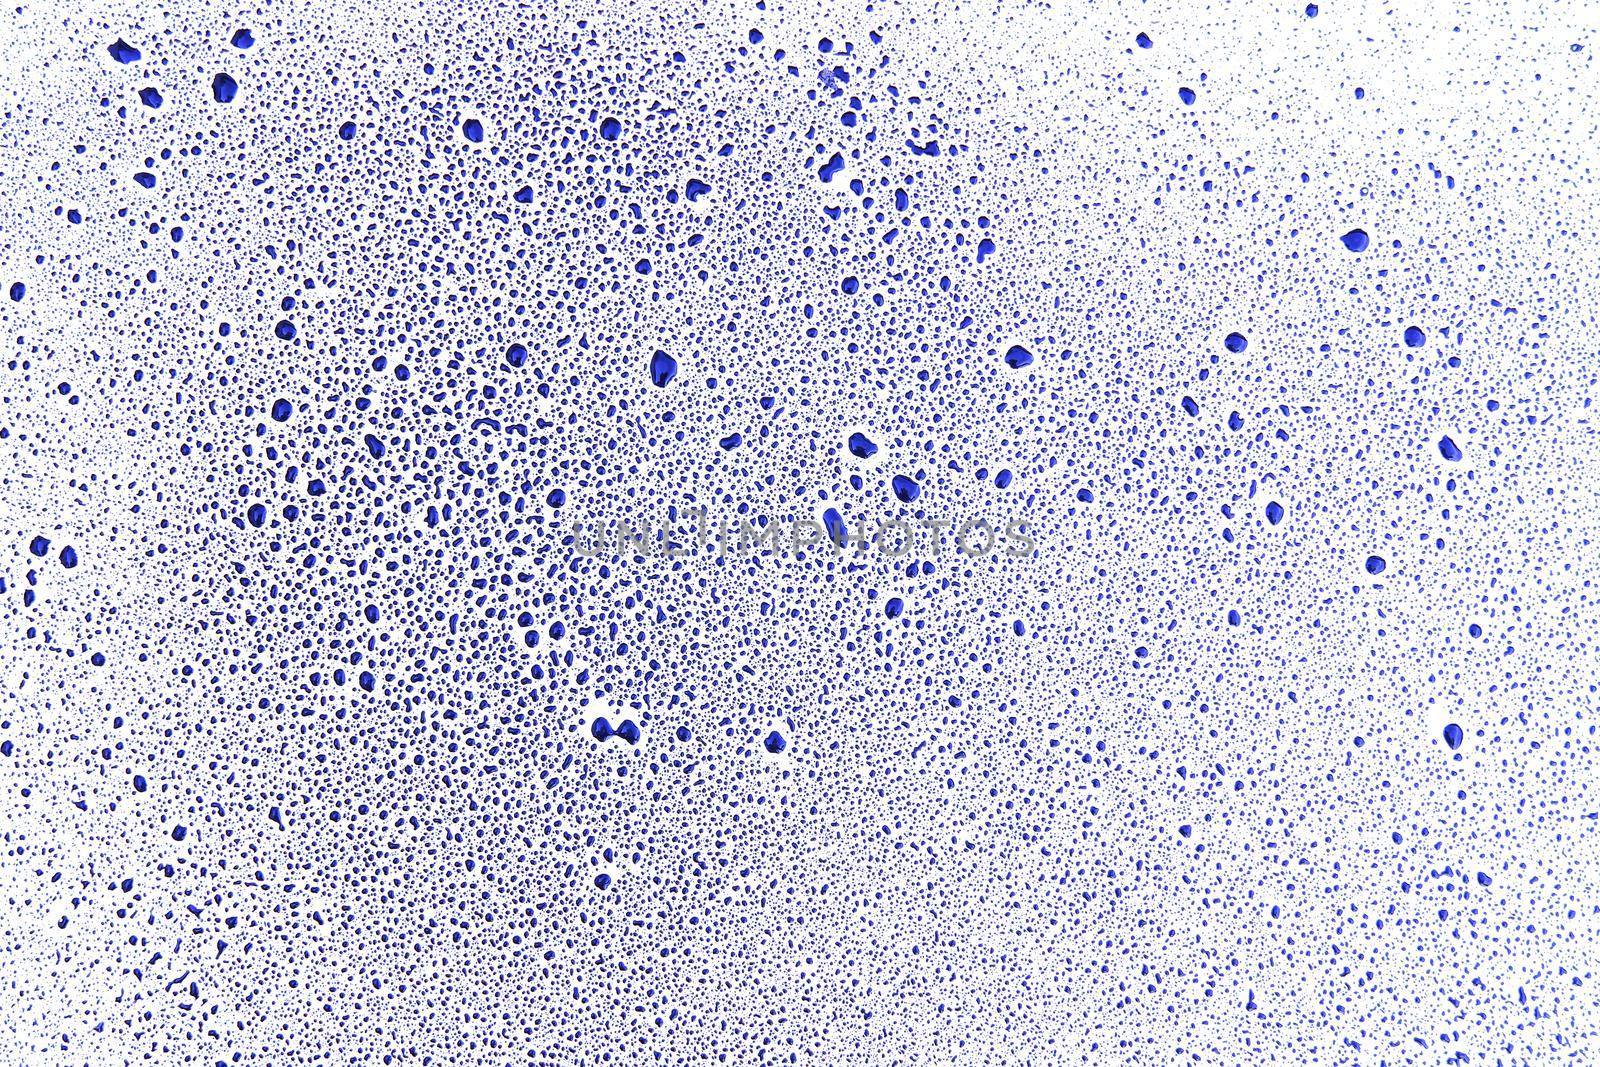 Detail of the drops of blue color on a white surface